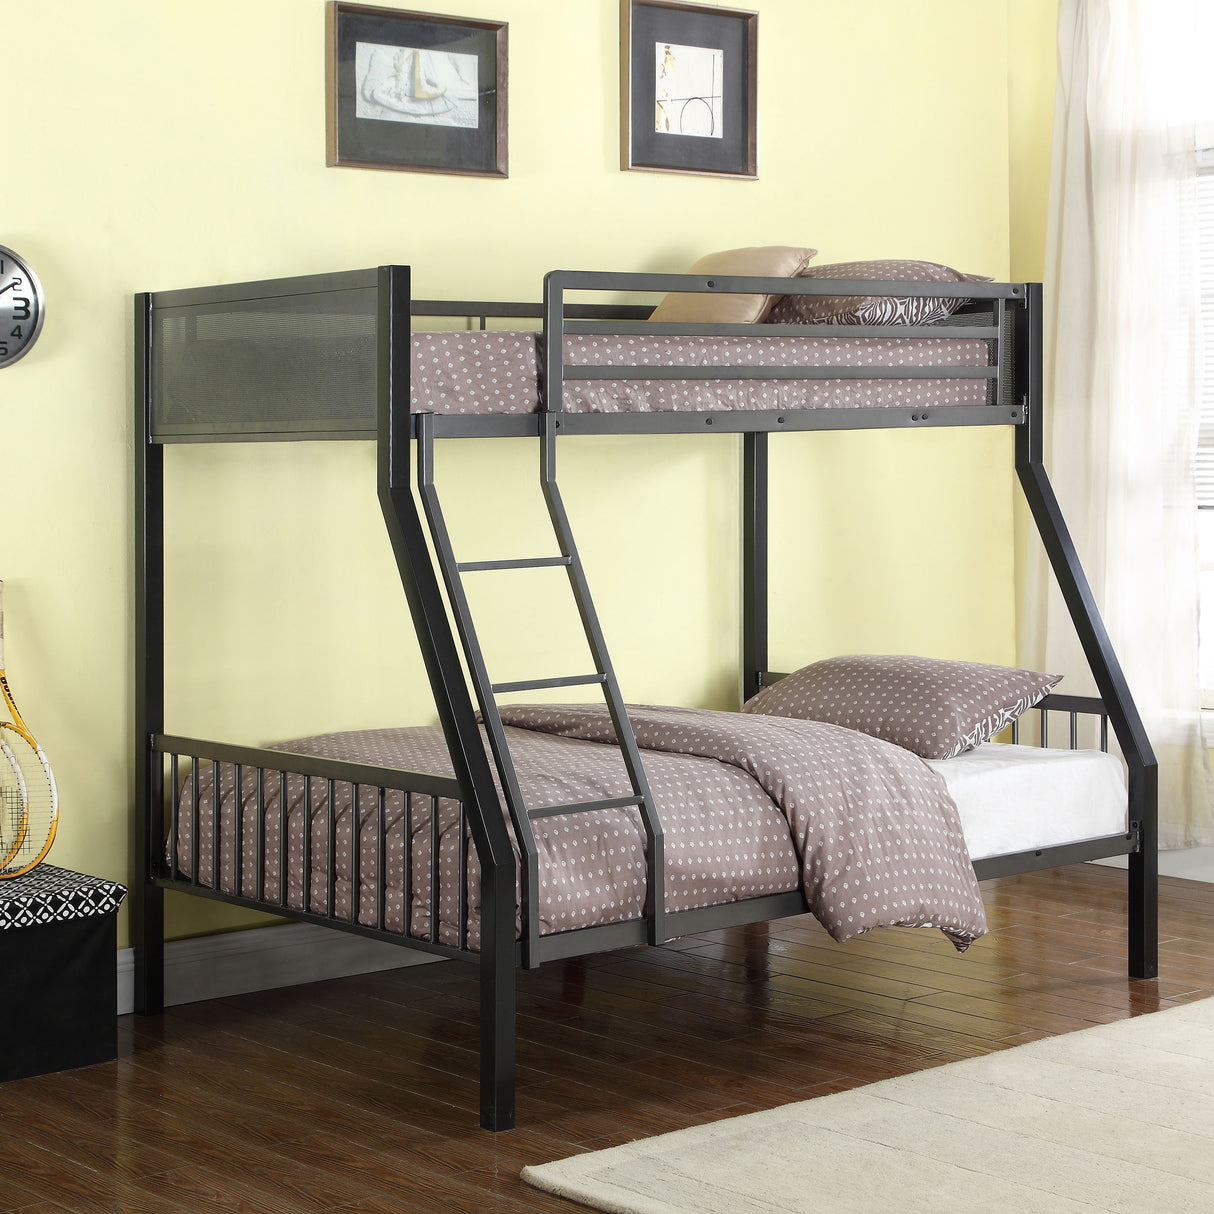 Twin / Full Bunk Bed - Meyers Twin Over Full Metal Bunk Bed Black and Gunmetal